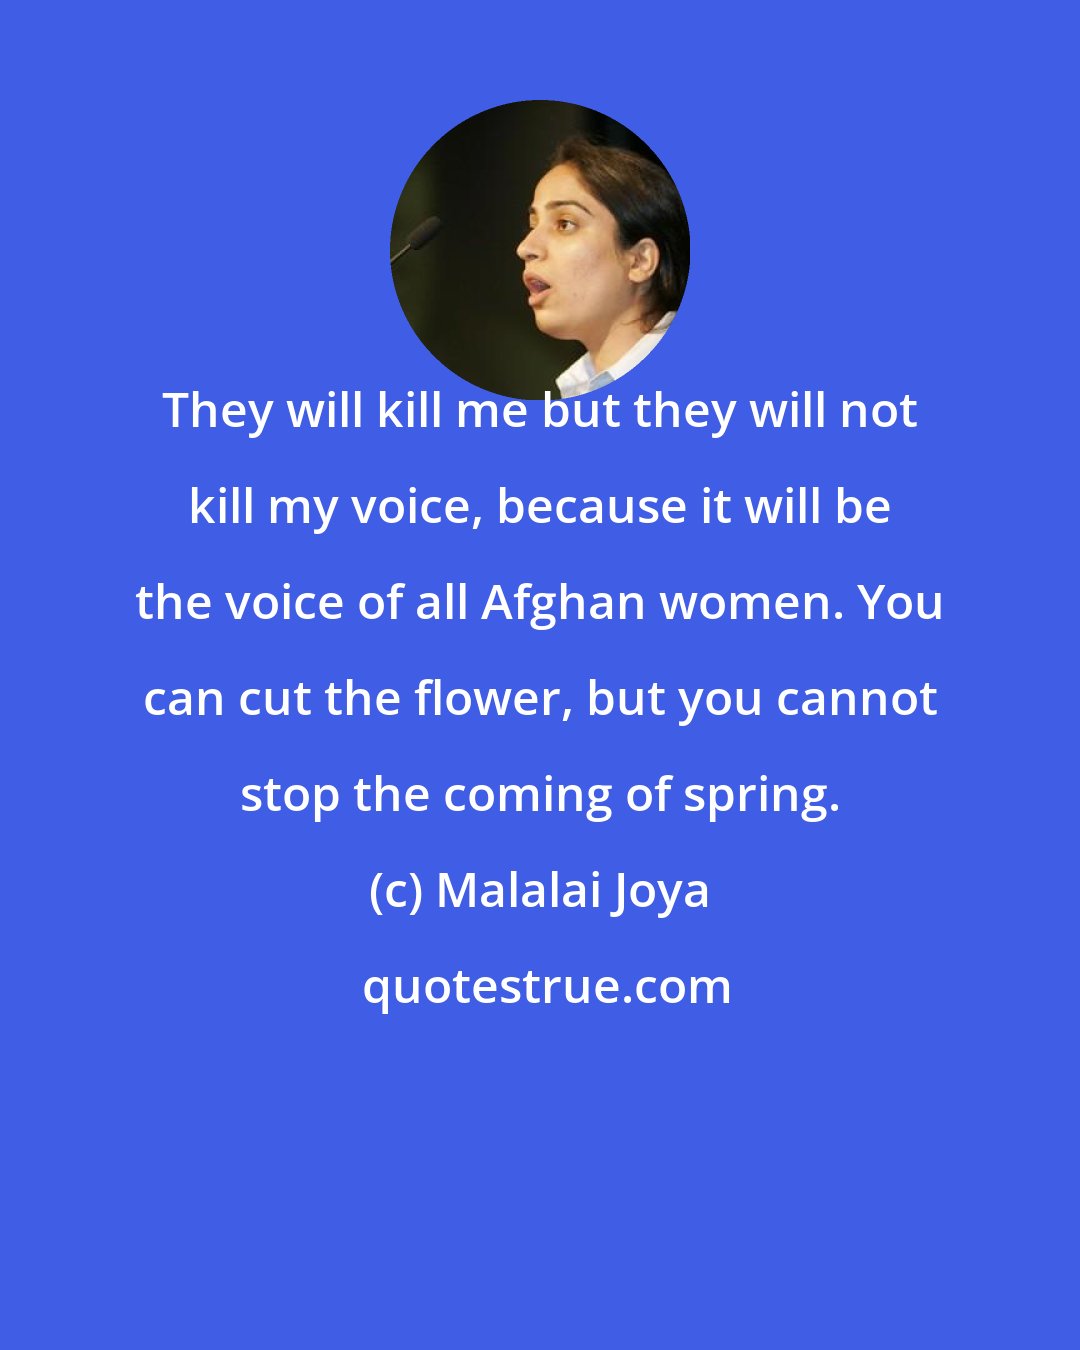 Malalai Joya: They will kill me but they will not kill my voice, because it will be the voice of all Afghan women. You can cut the flower, but you cannot stop the coming of spring.